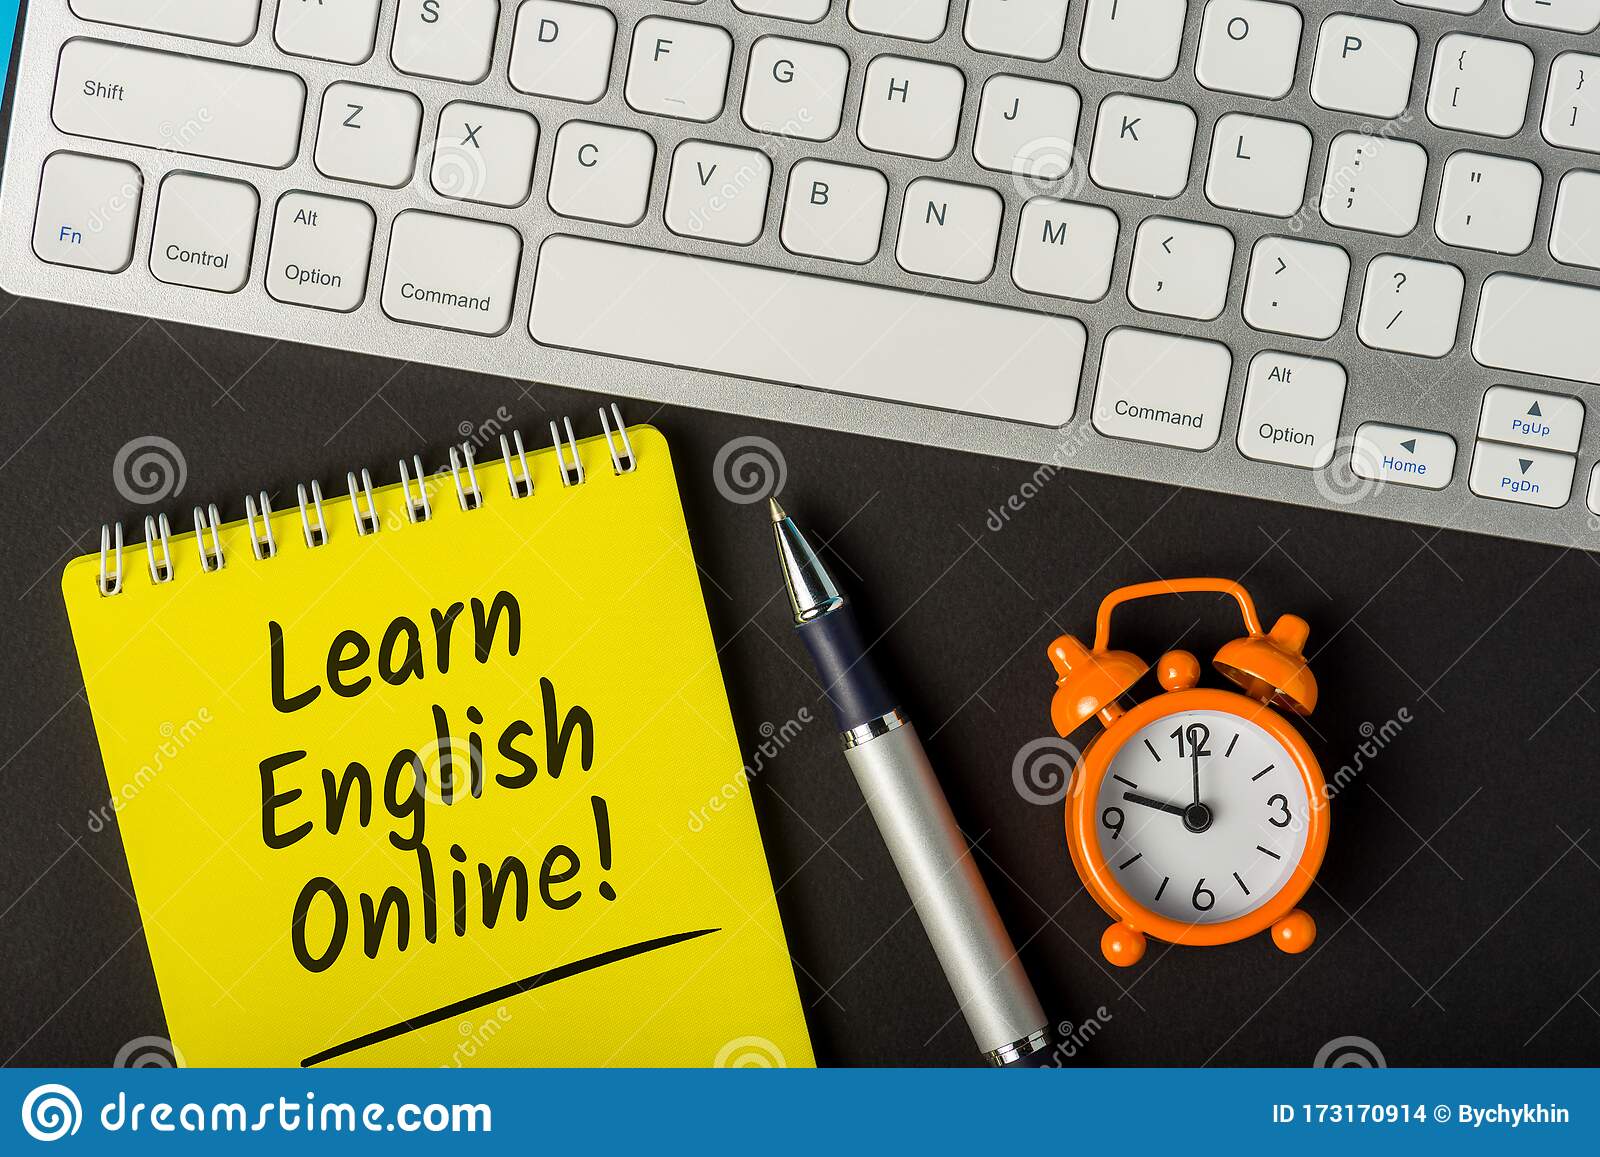 how to learn english online for free